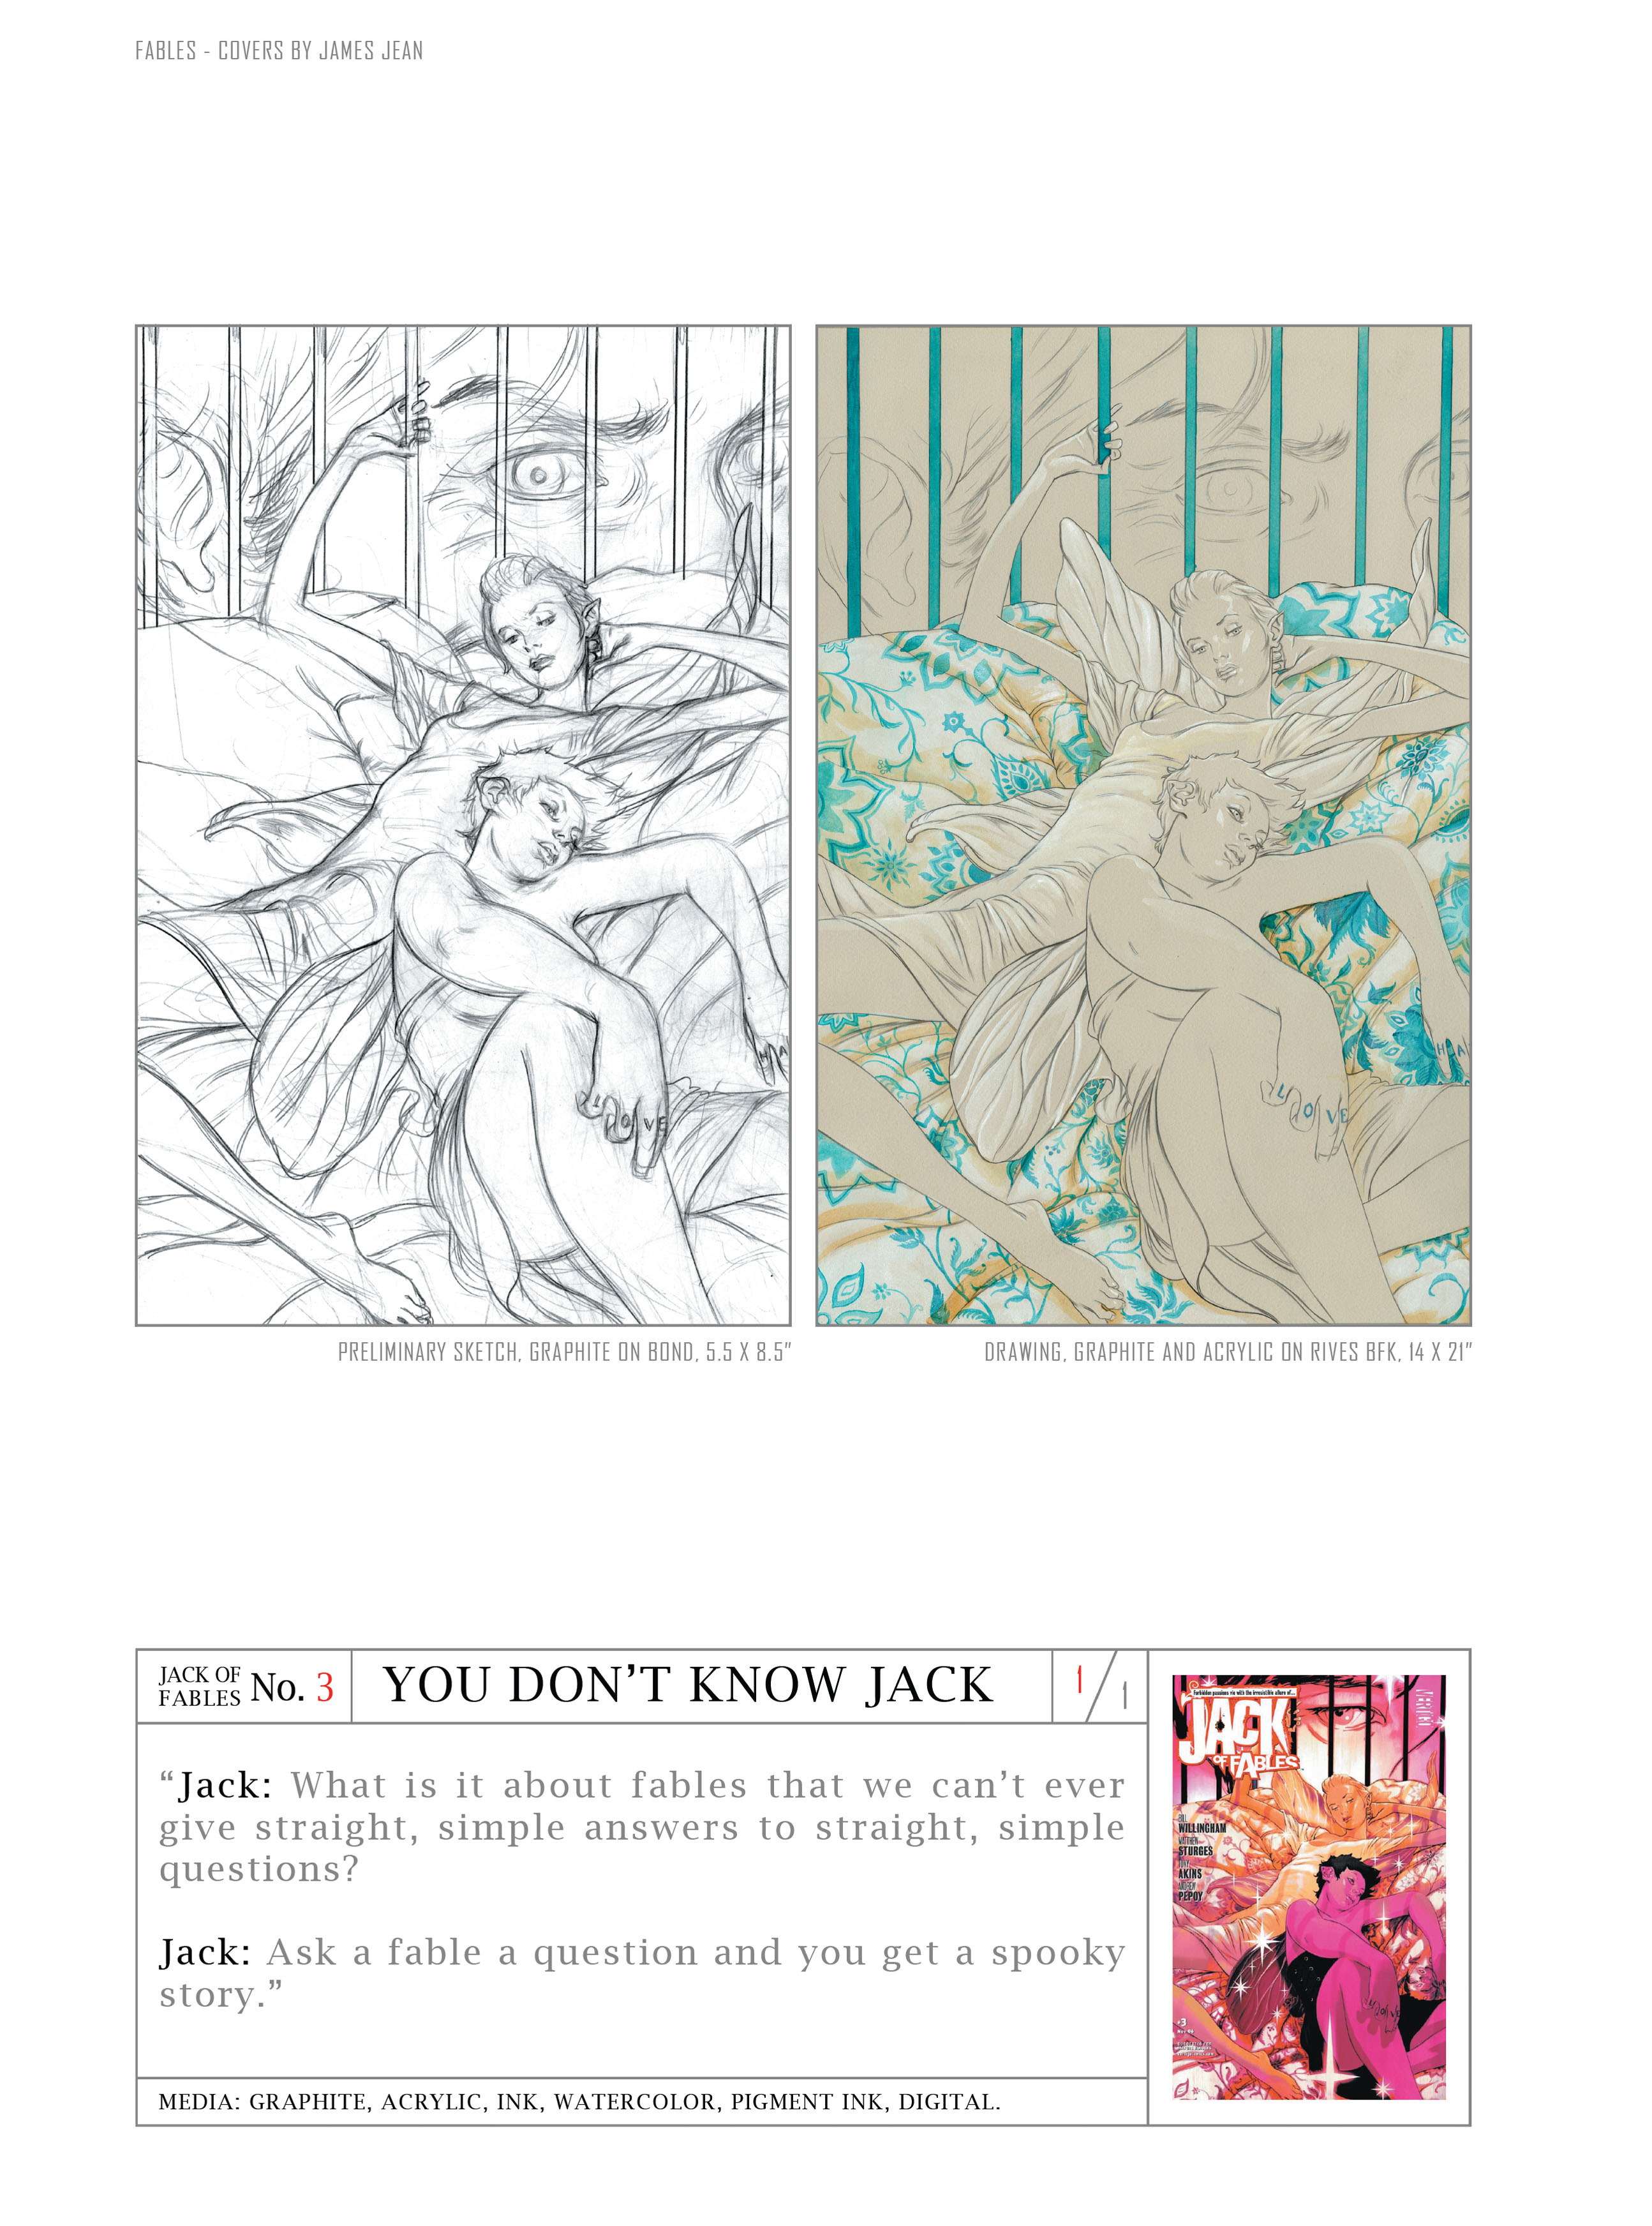 Read online Fables: Covers by James Jean comic -  Issue # TPB (Part 3) - 7